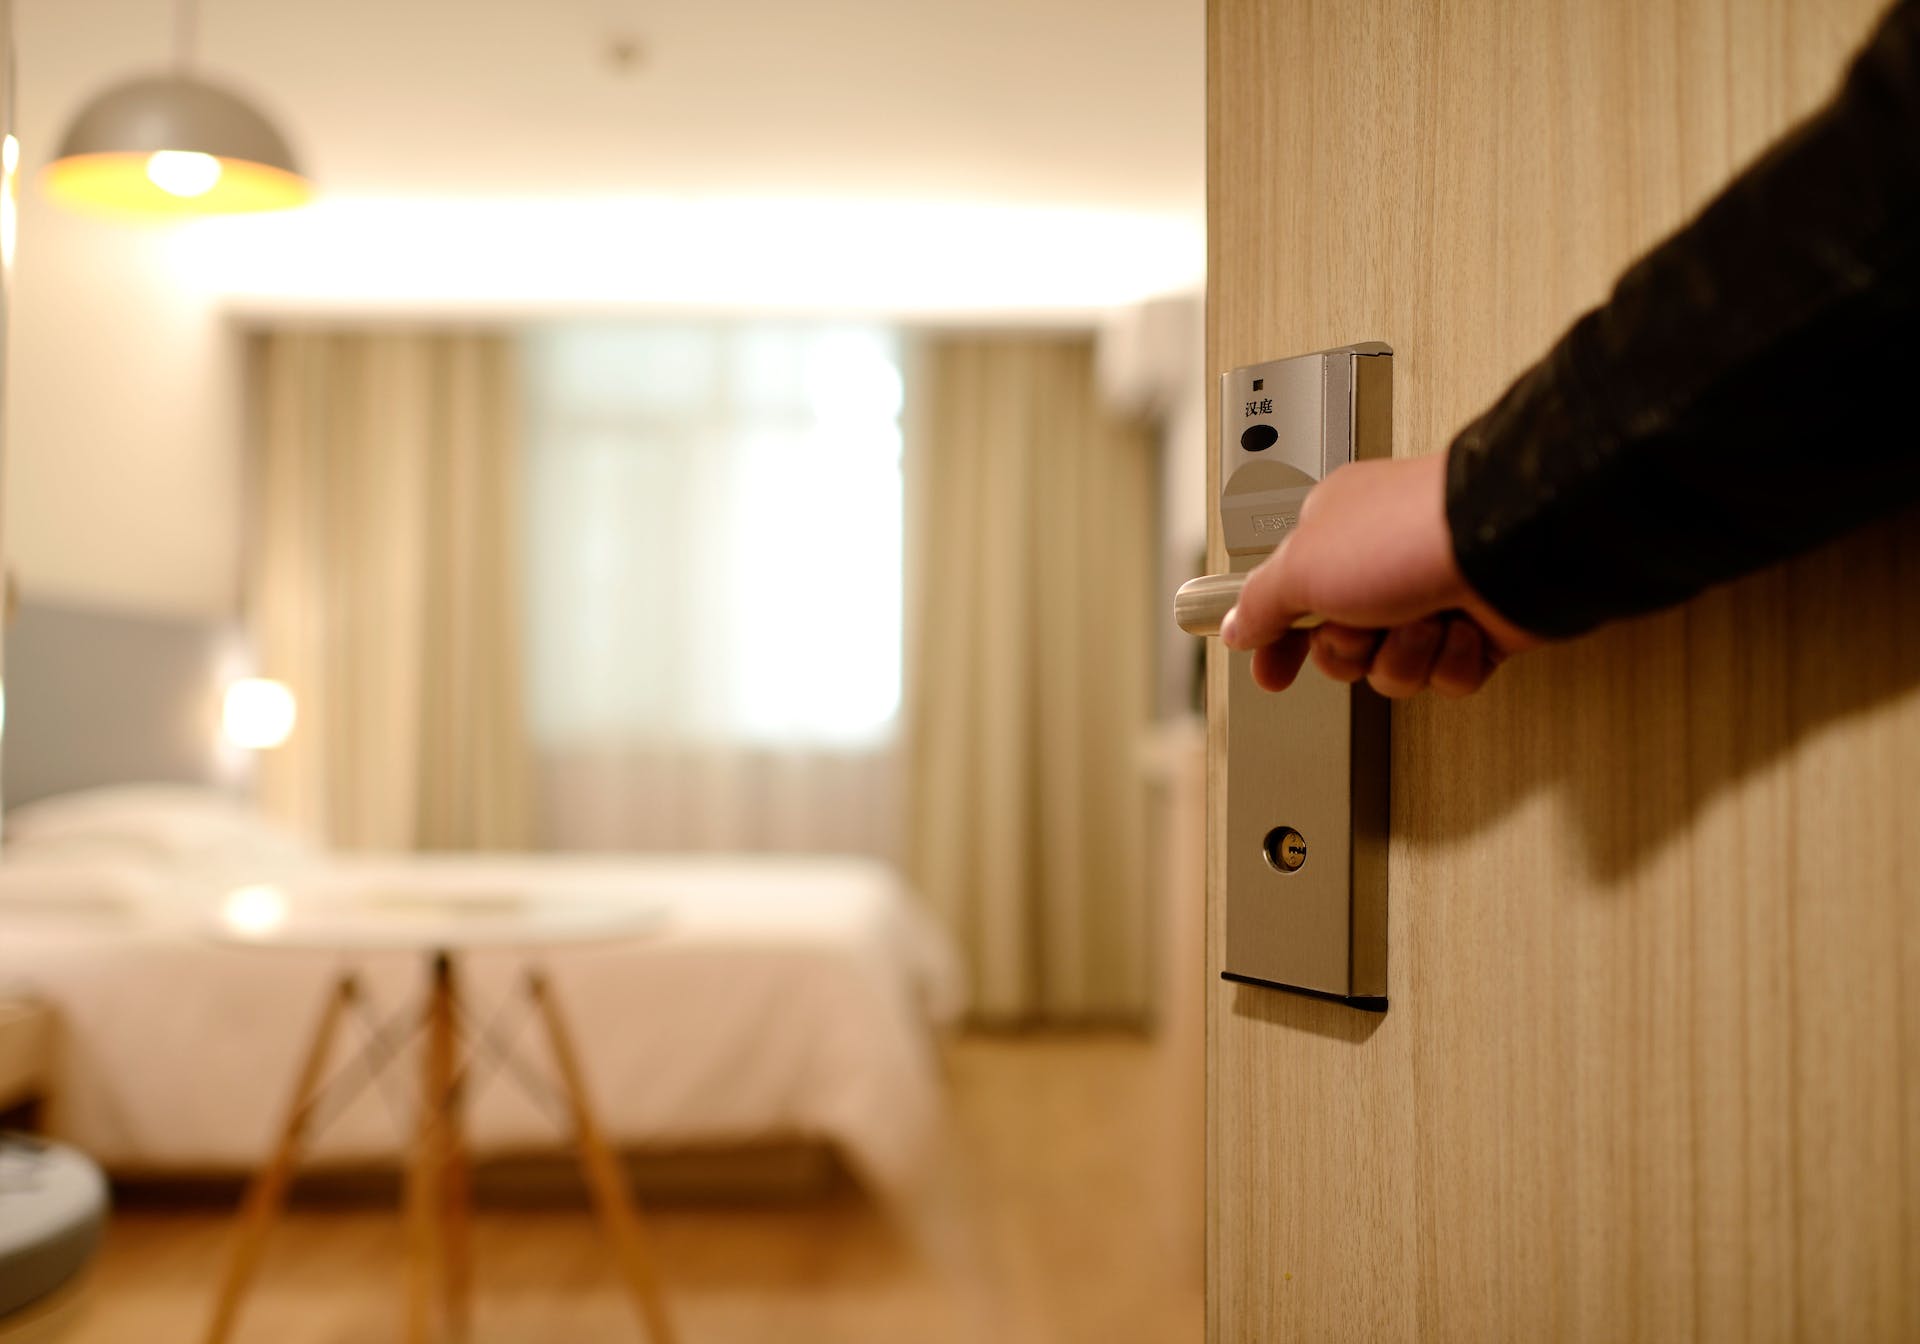 Excellent Guest Services: 10 Tips for Your Hotel